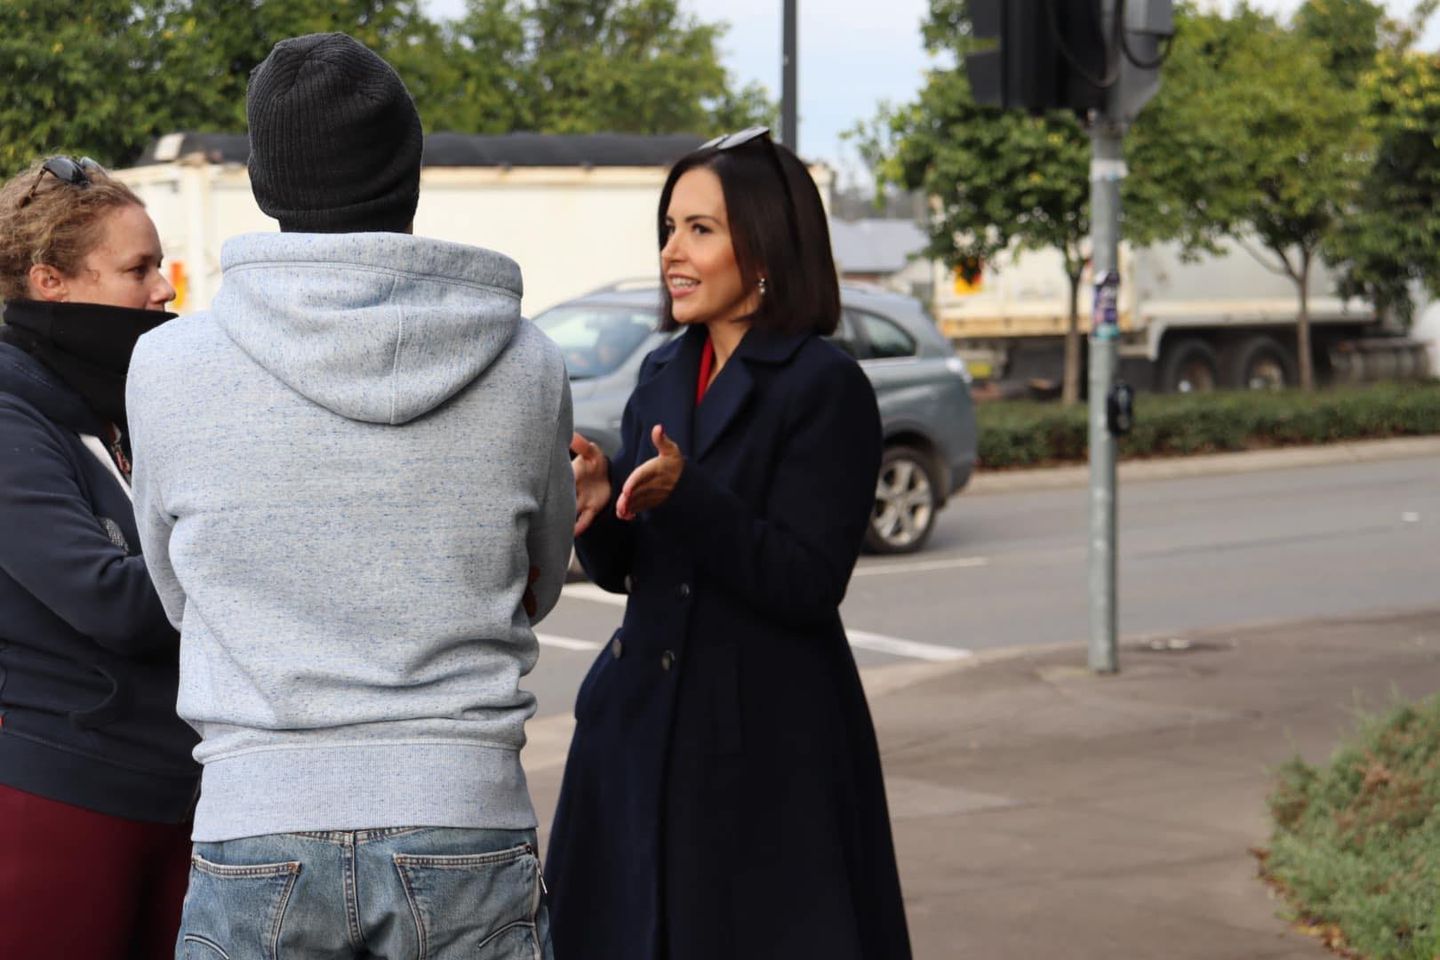 Image shows NSW Deputy Premier Prue Car speaking with two people on a street corner.